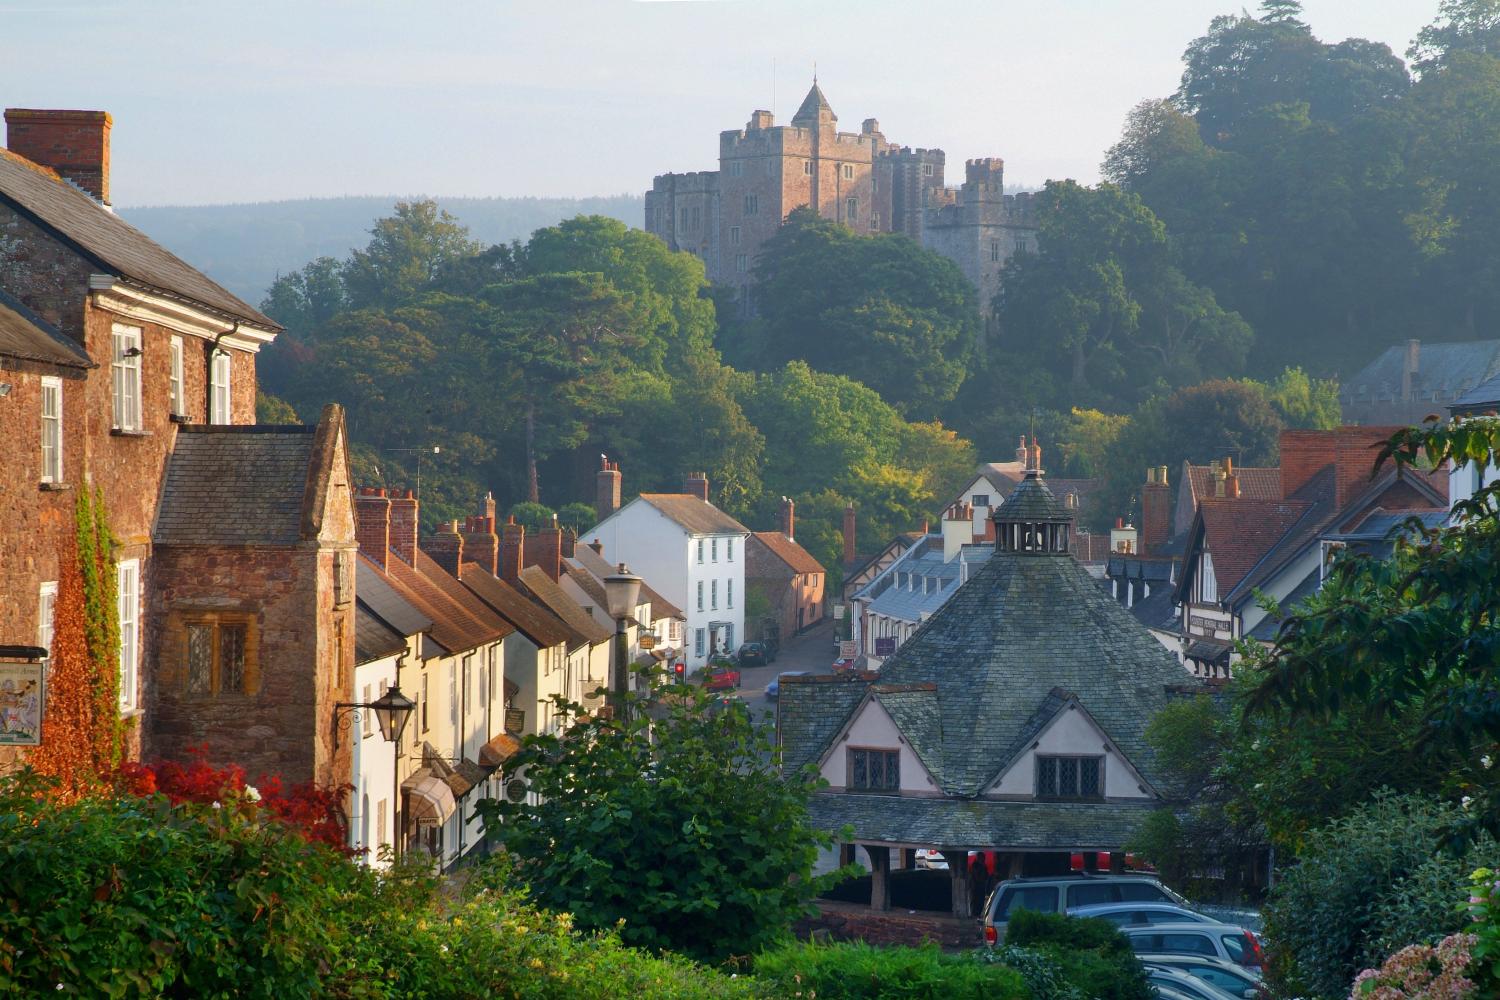 Dunster High St with Dunster Castle at the far end